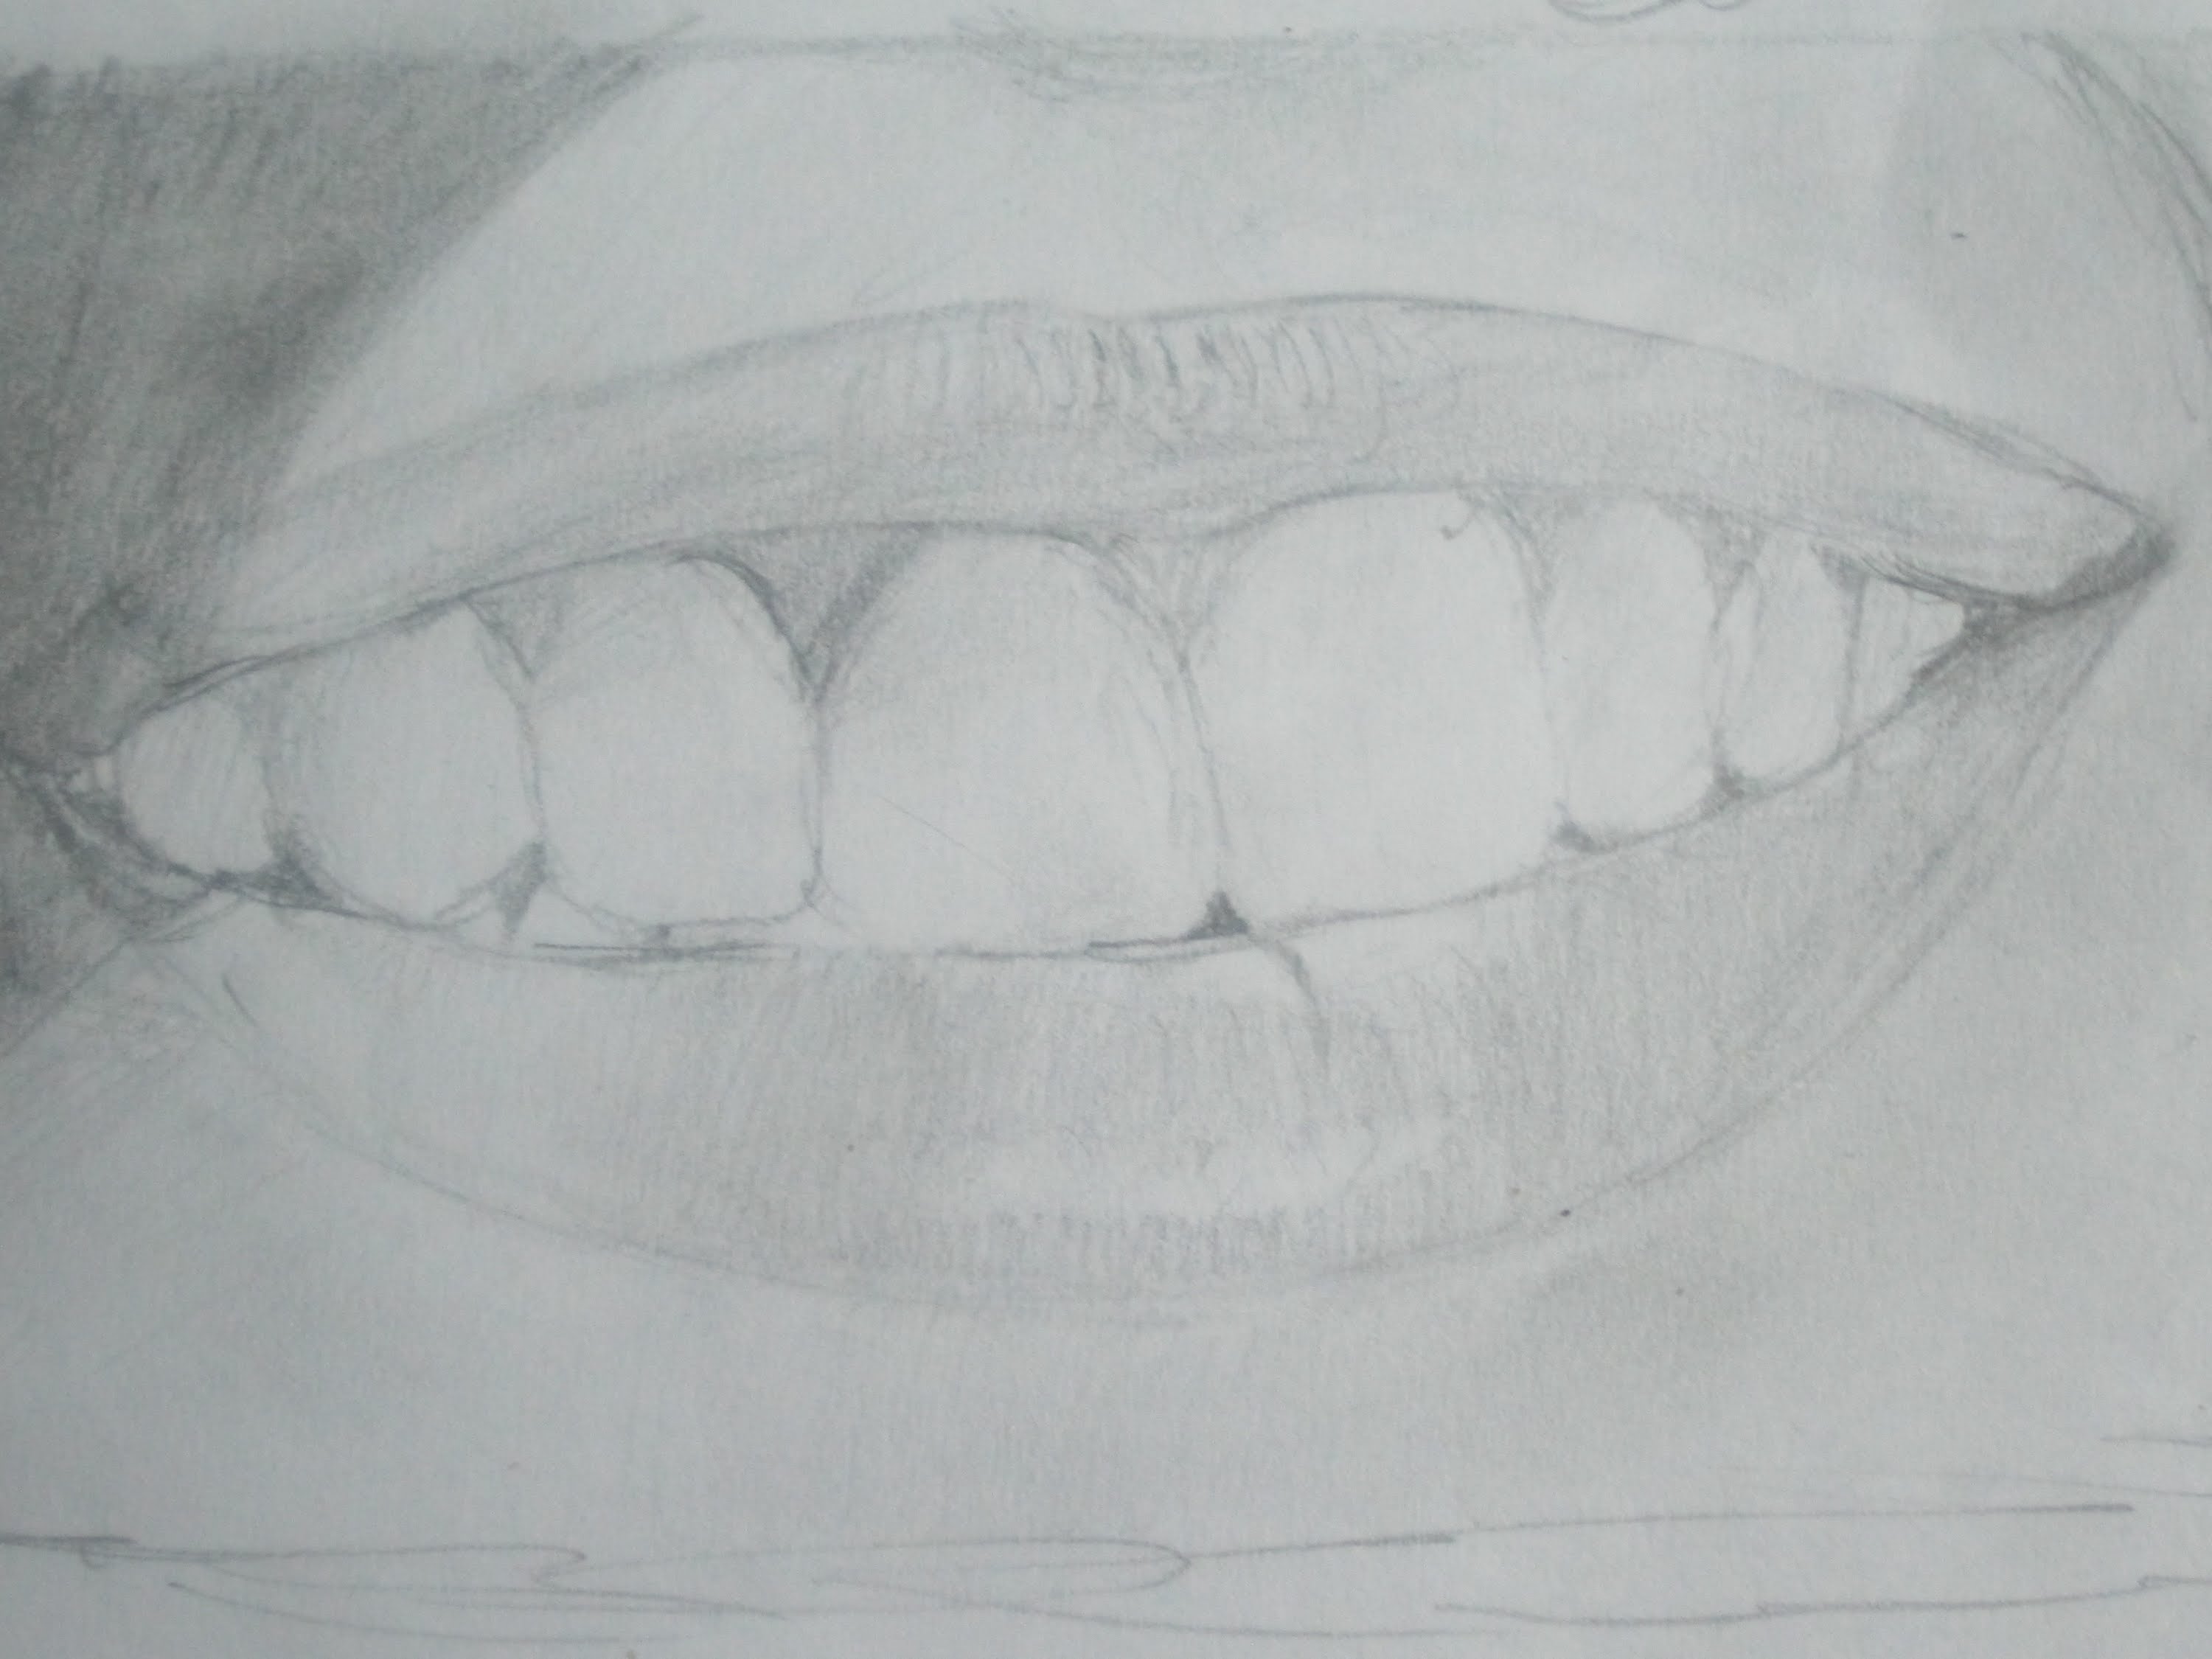 how to draw realistic smiles